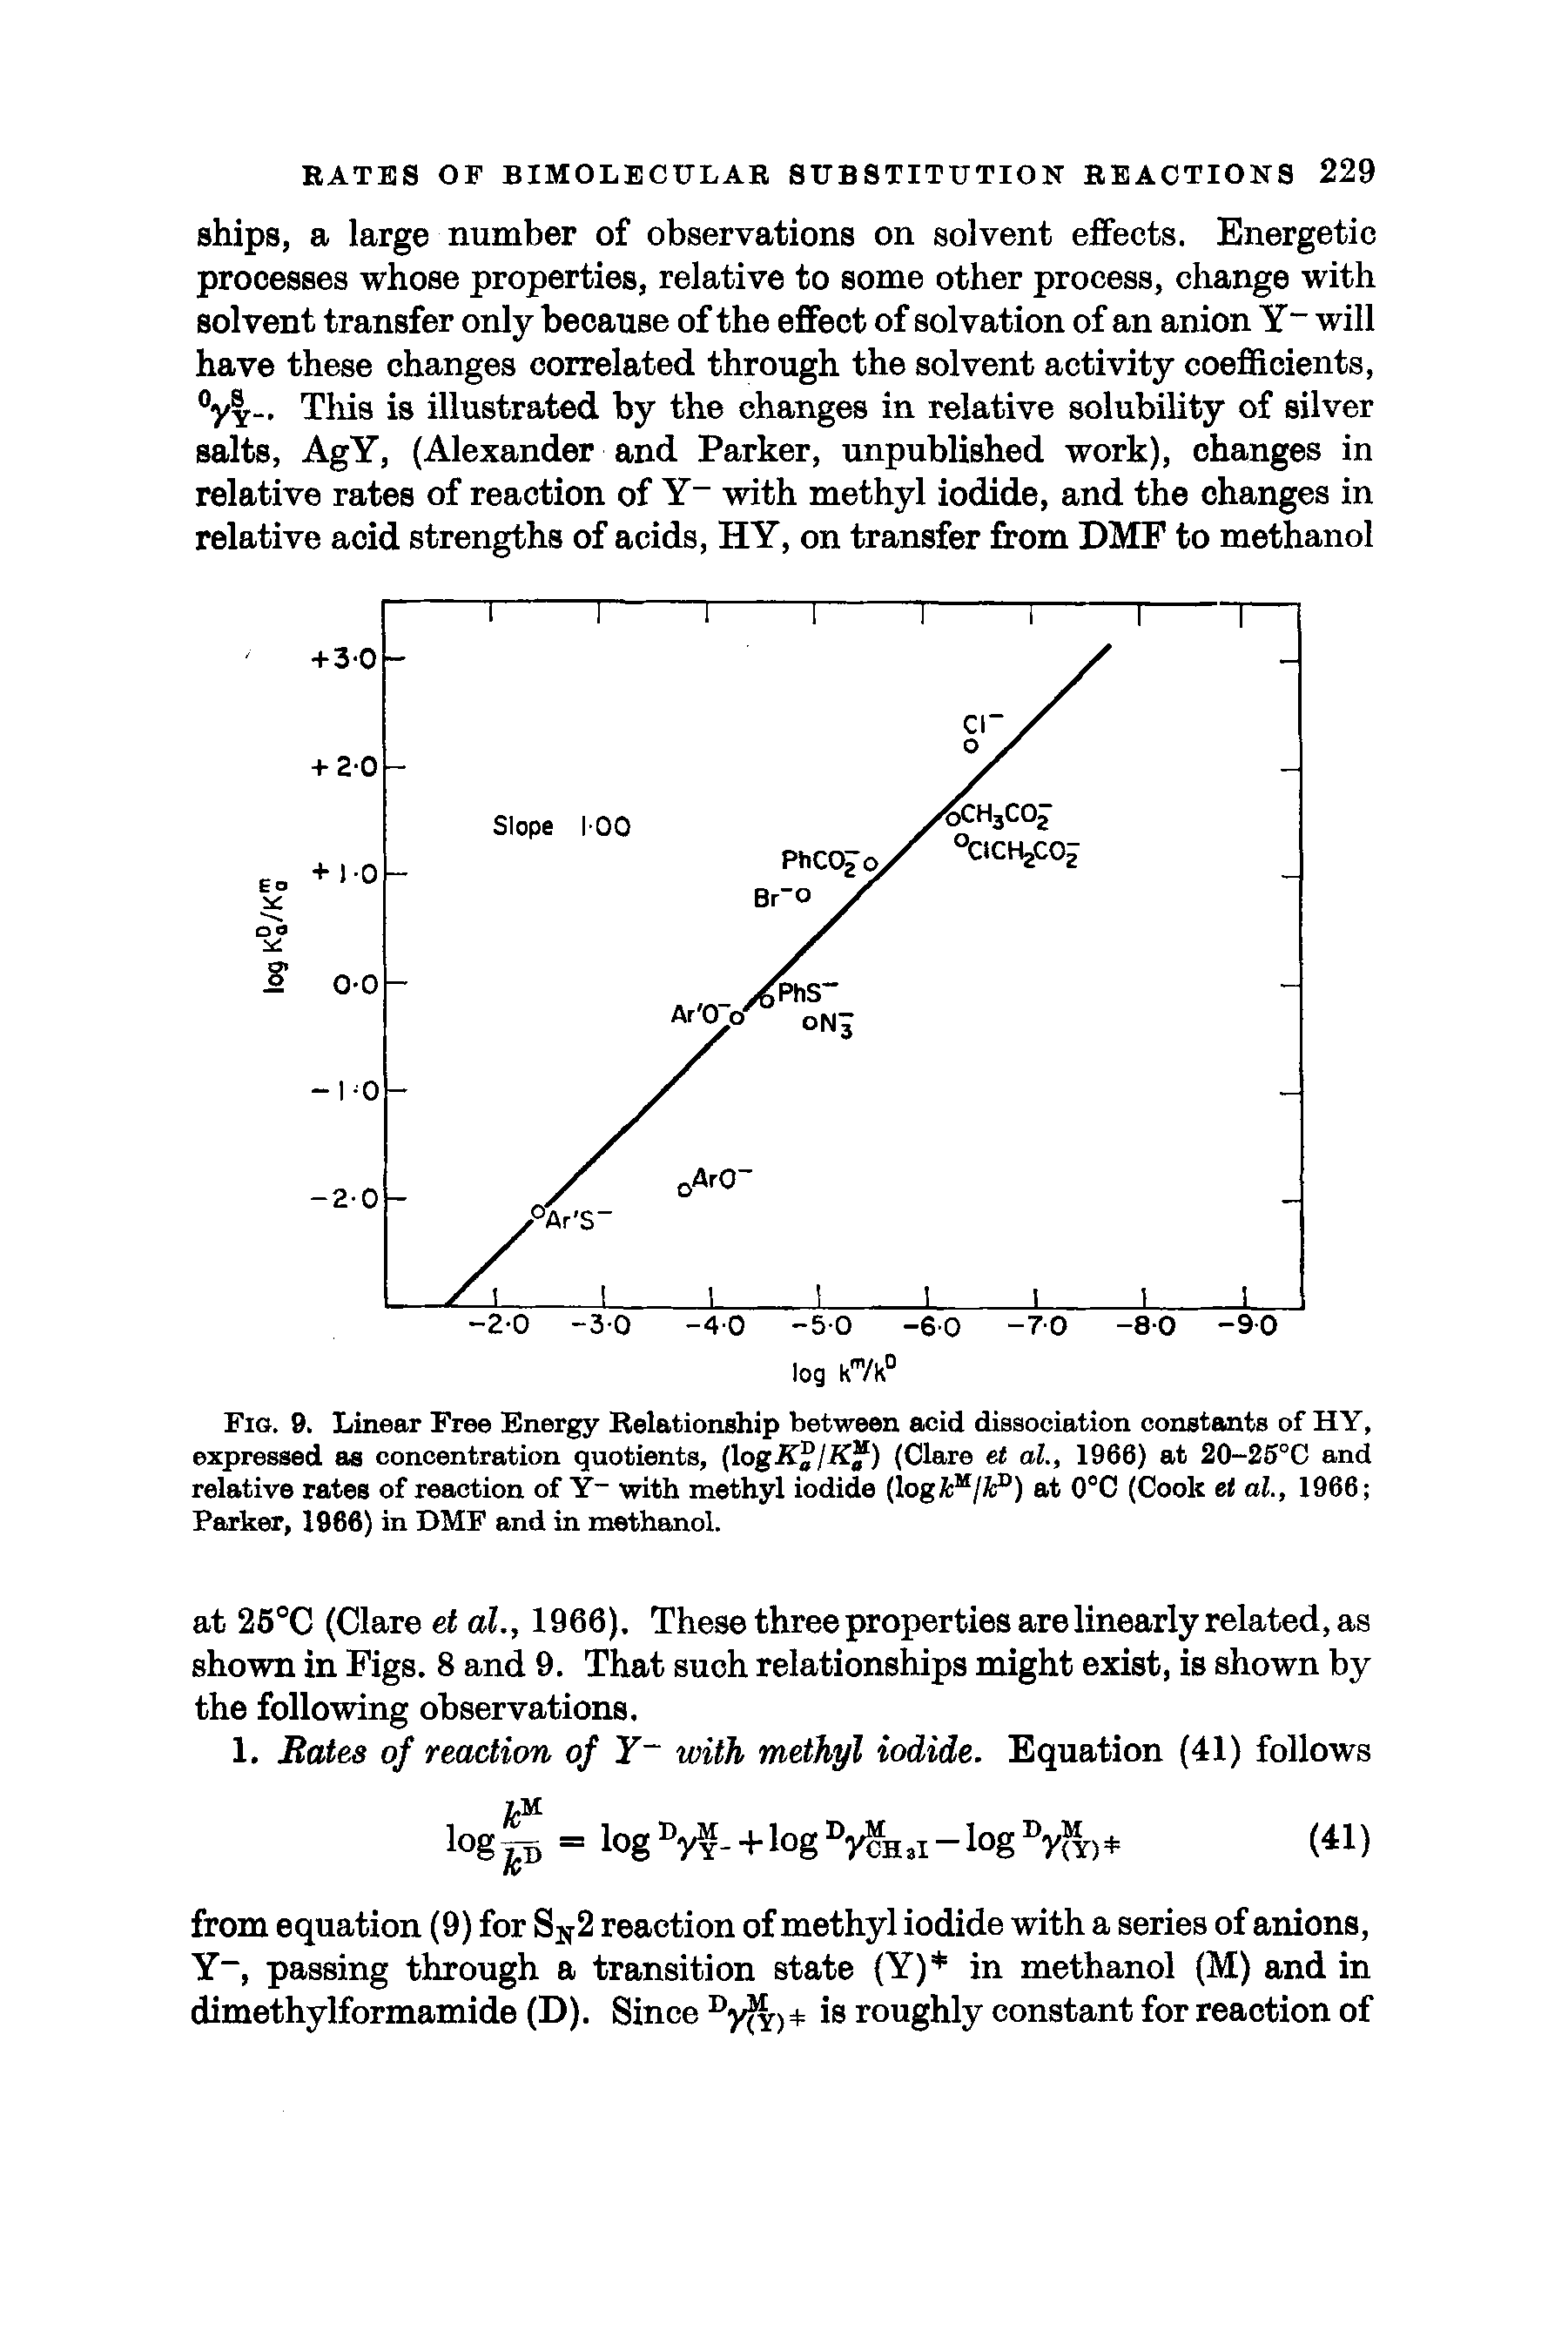 Fig. 9. Linear Free Energy Relationship between acid dissociation constants of HY, expressed as concentration quotients, (logiCj/K ) (Clare et at, 1966) at 20-25°C and relative rates of reaction of Y with methyl iodide (logA /fc°) at 0°C (Cook et at, 1966 Parker, 1966) in DMF and in methanol.